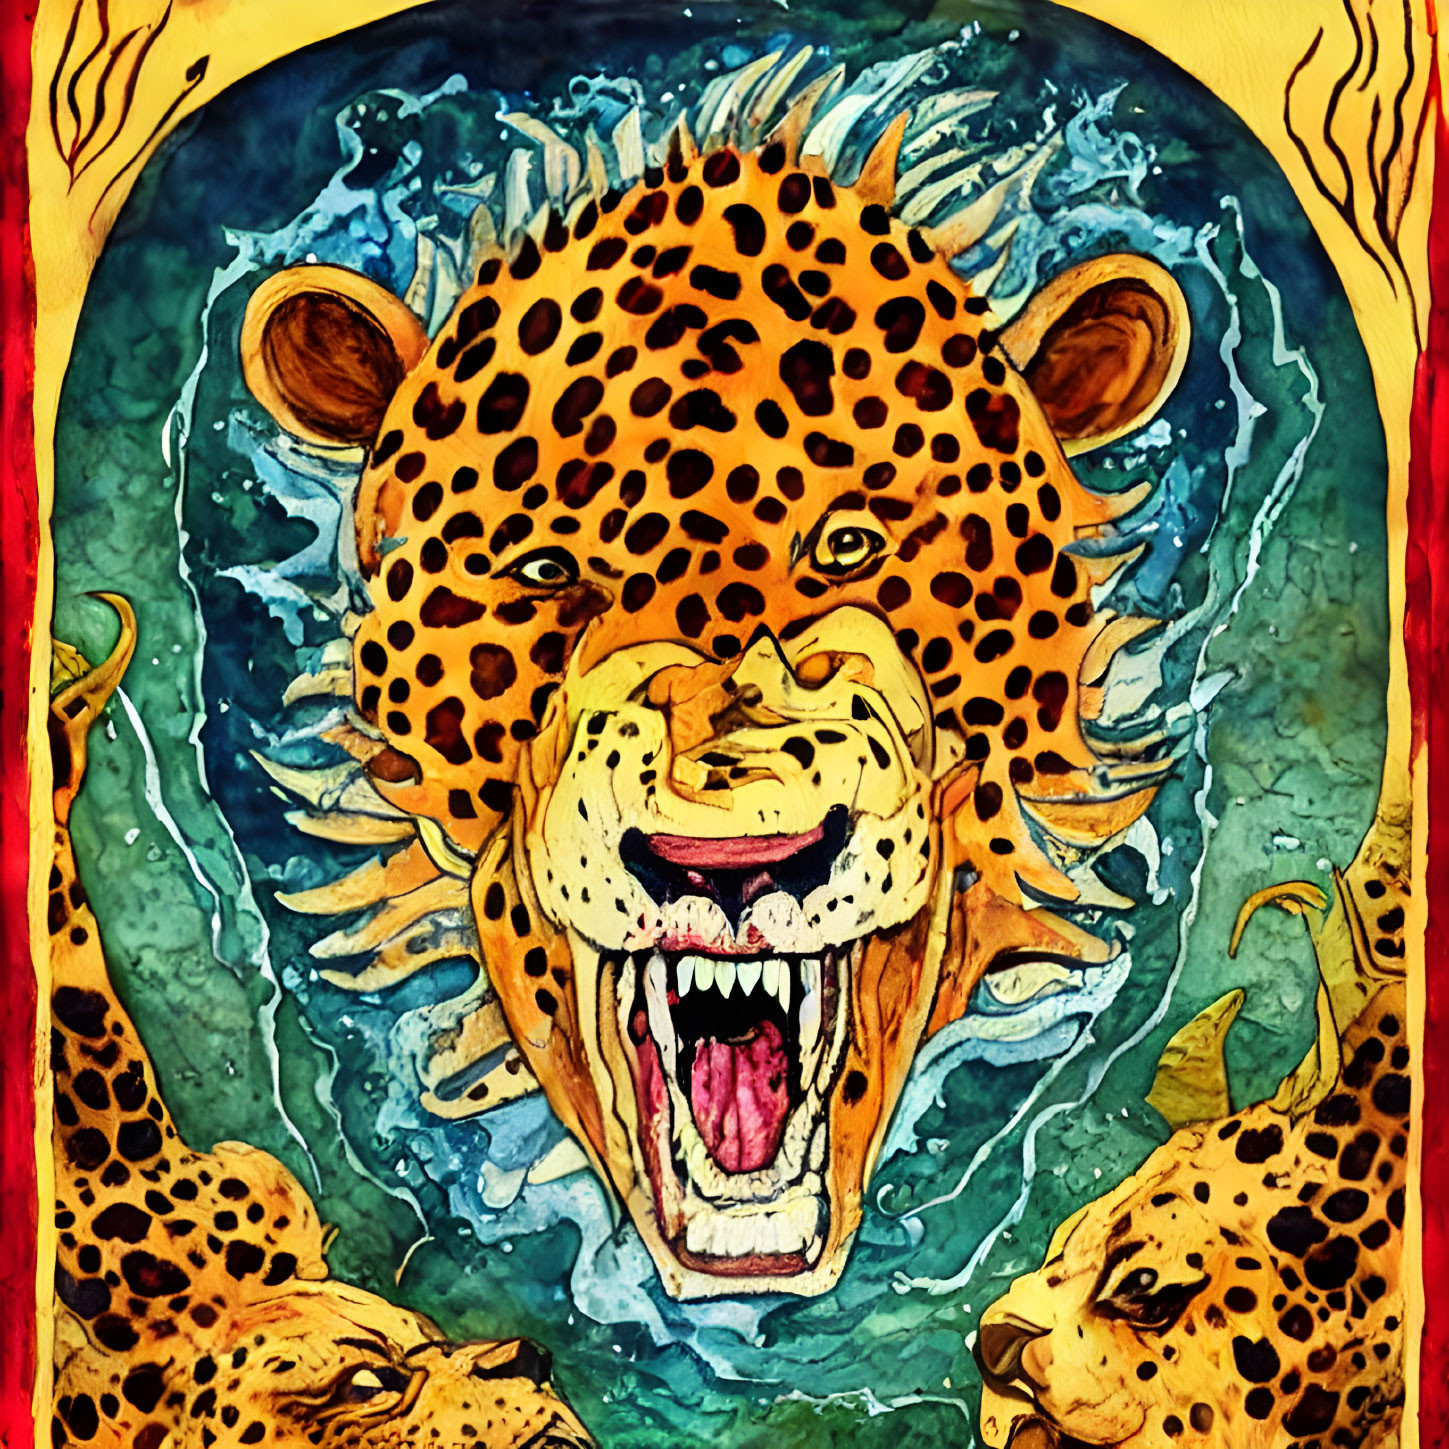 Vibrant illustration of roaring leopard with exaggerated features, framed by two leopards, against fiery